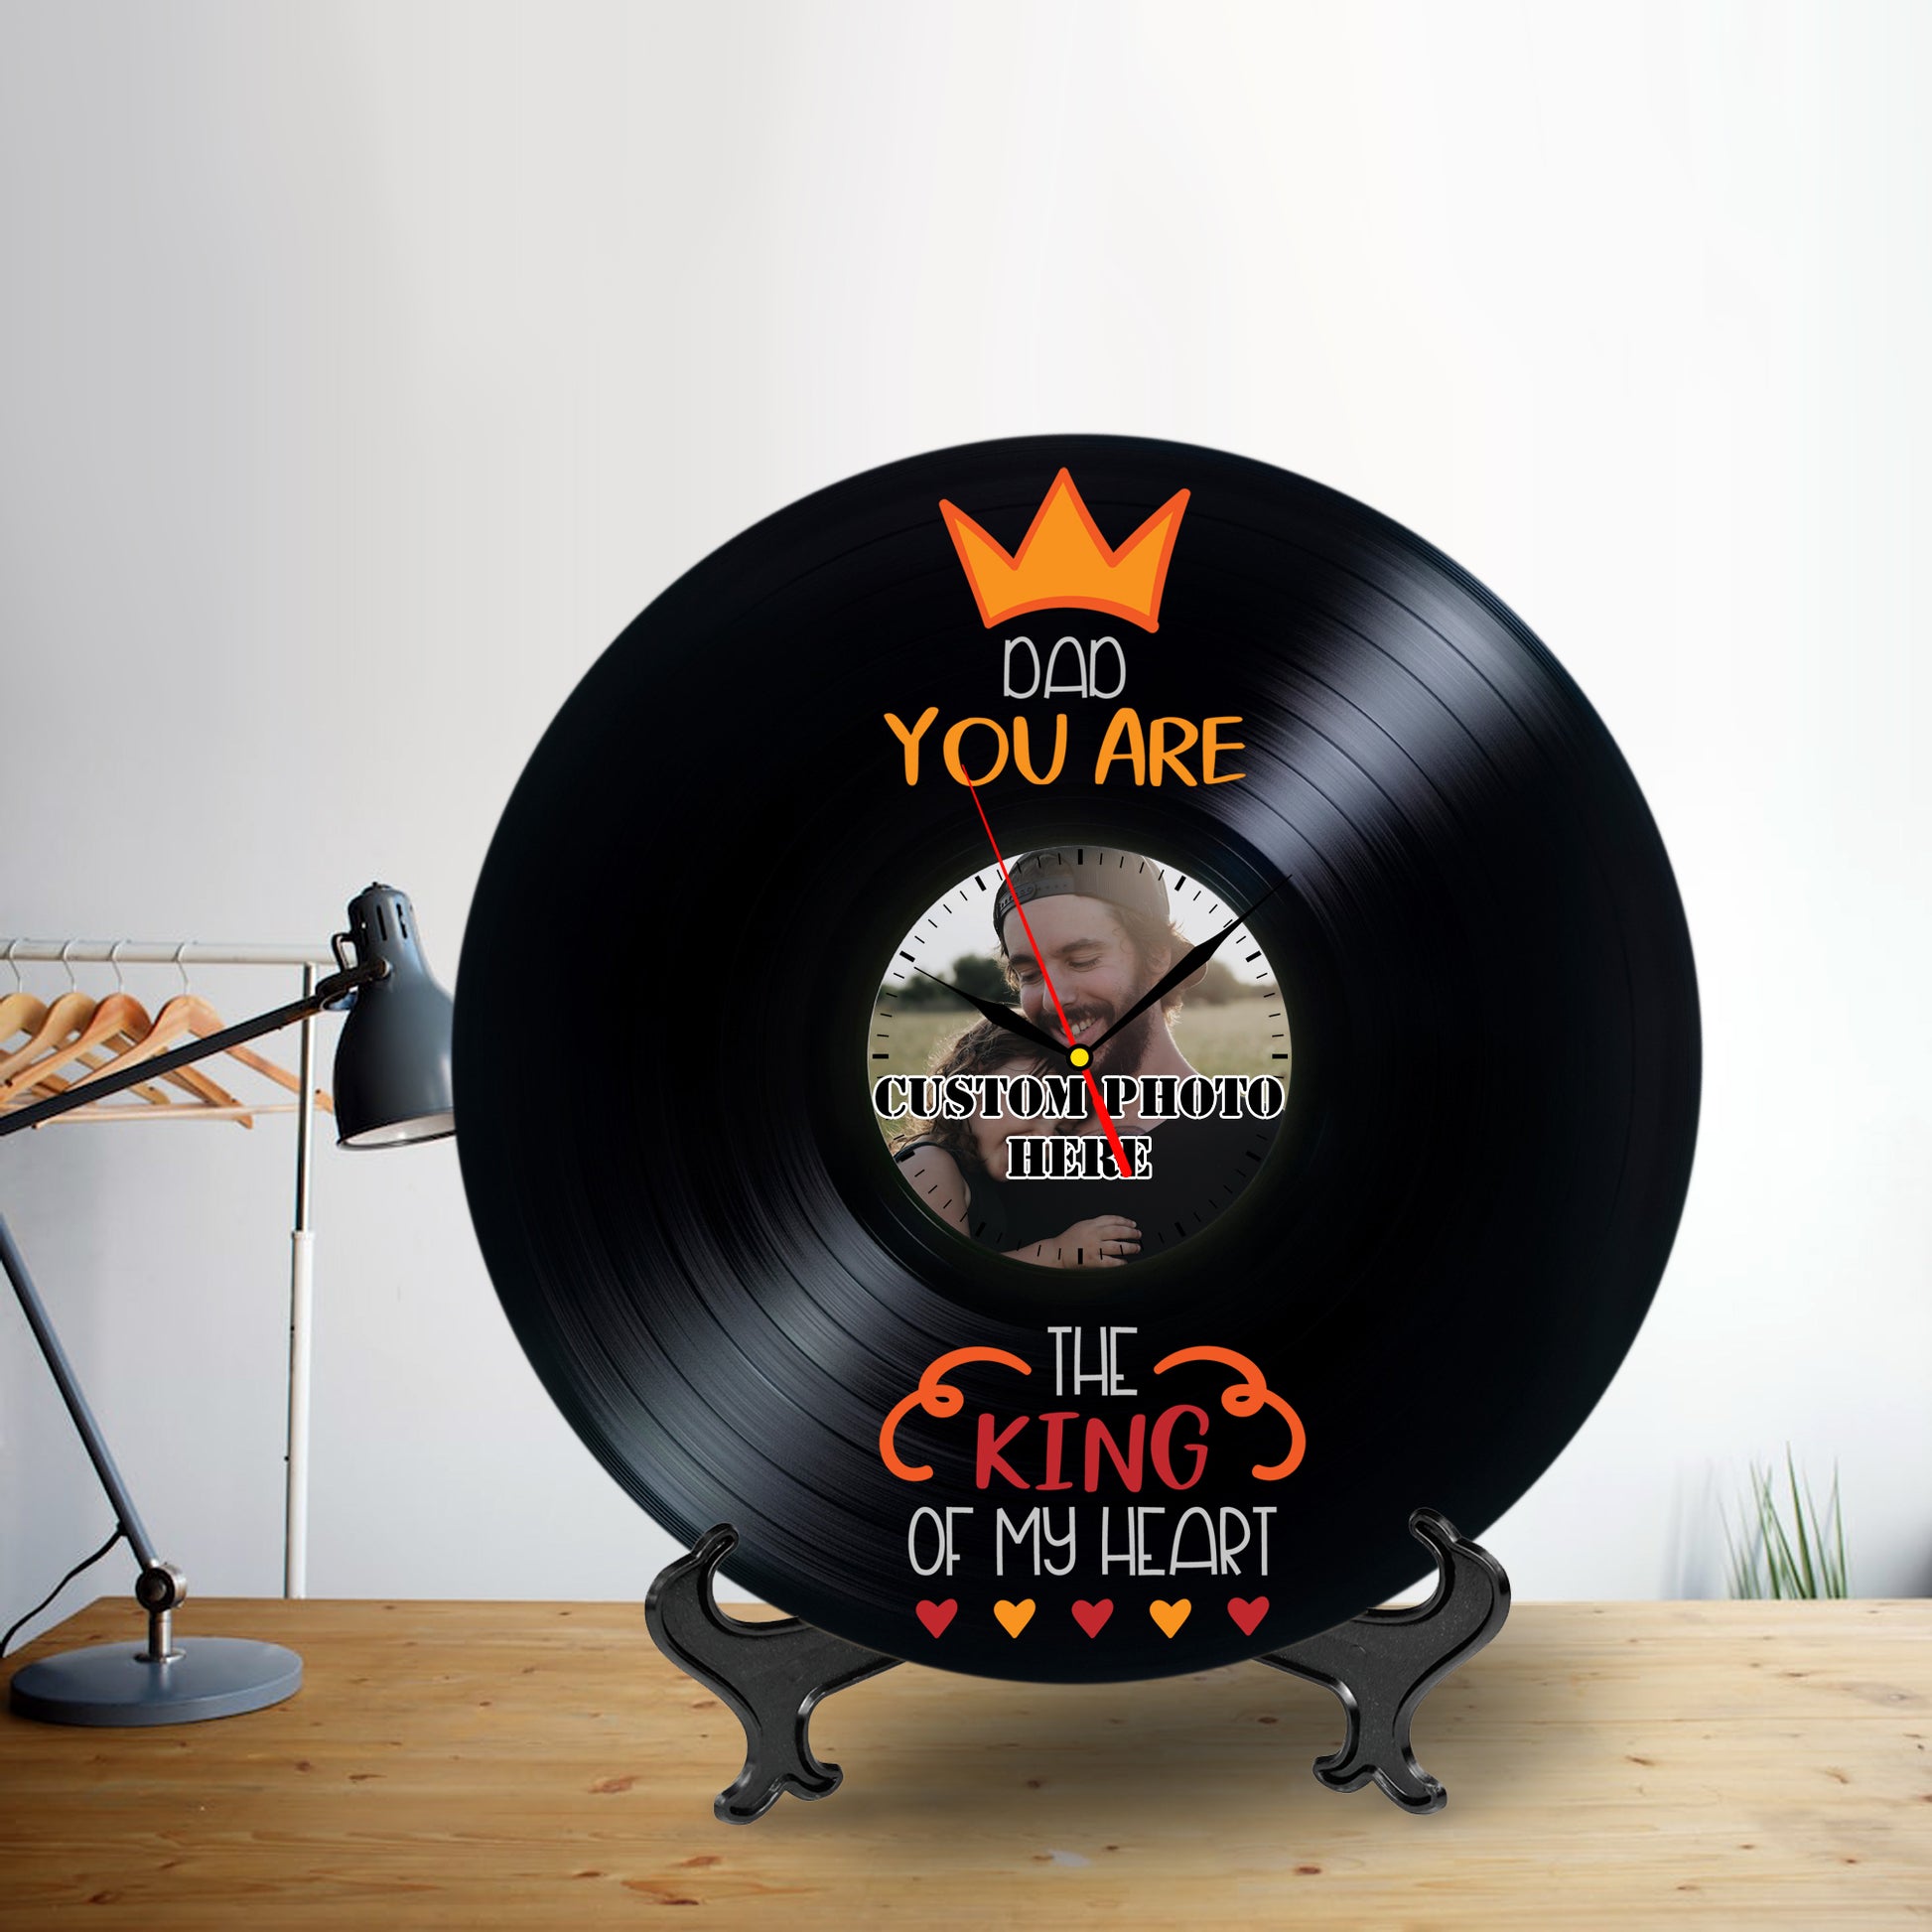 Personalized Lp Record Photo Clock Gift for Father